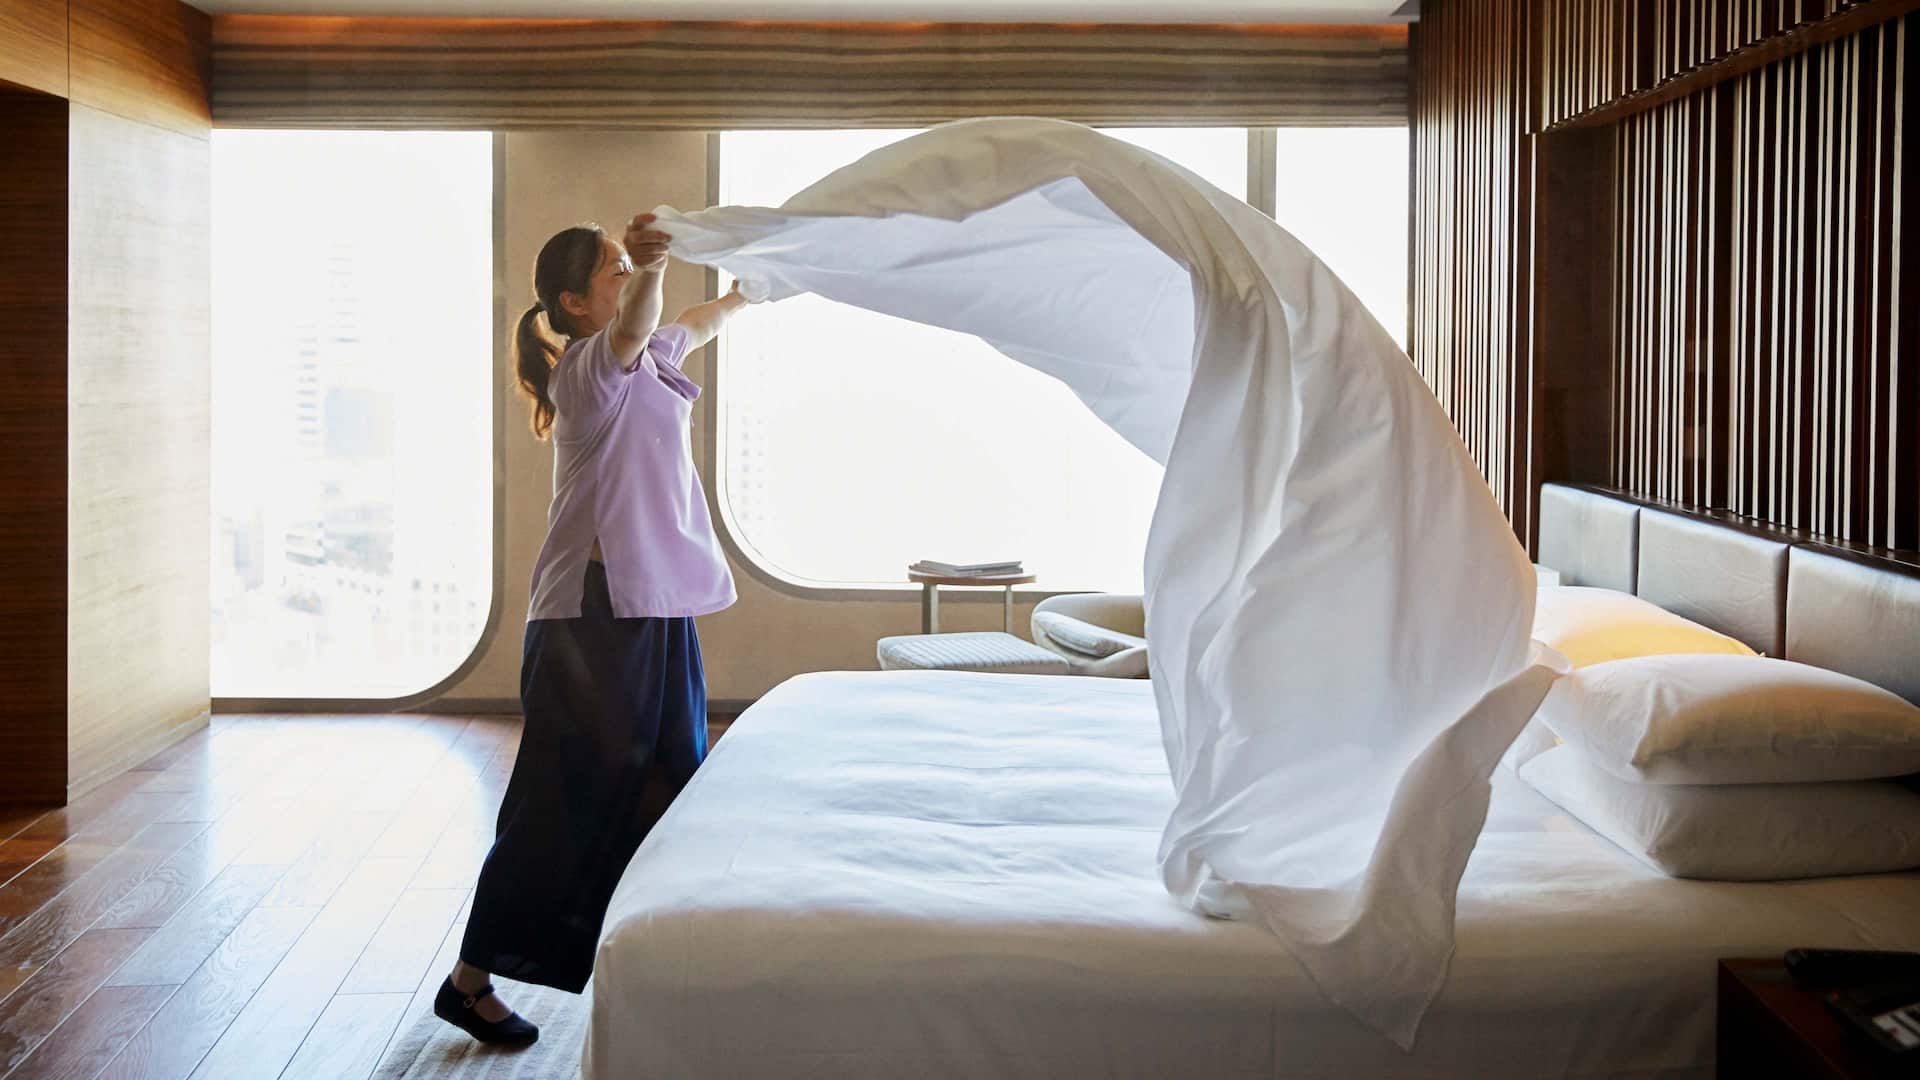 A hotel worker billows out a fresh sheet over a guest bed.